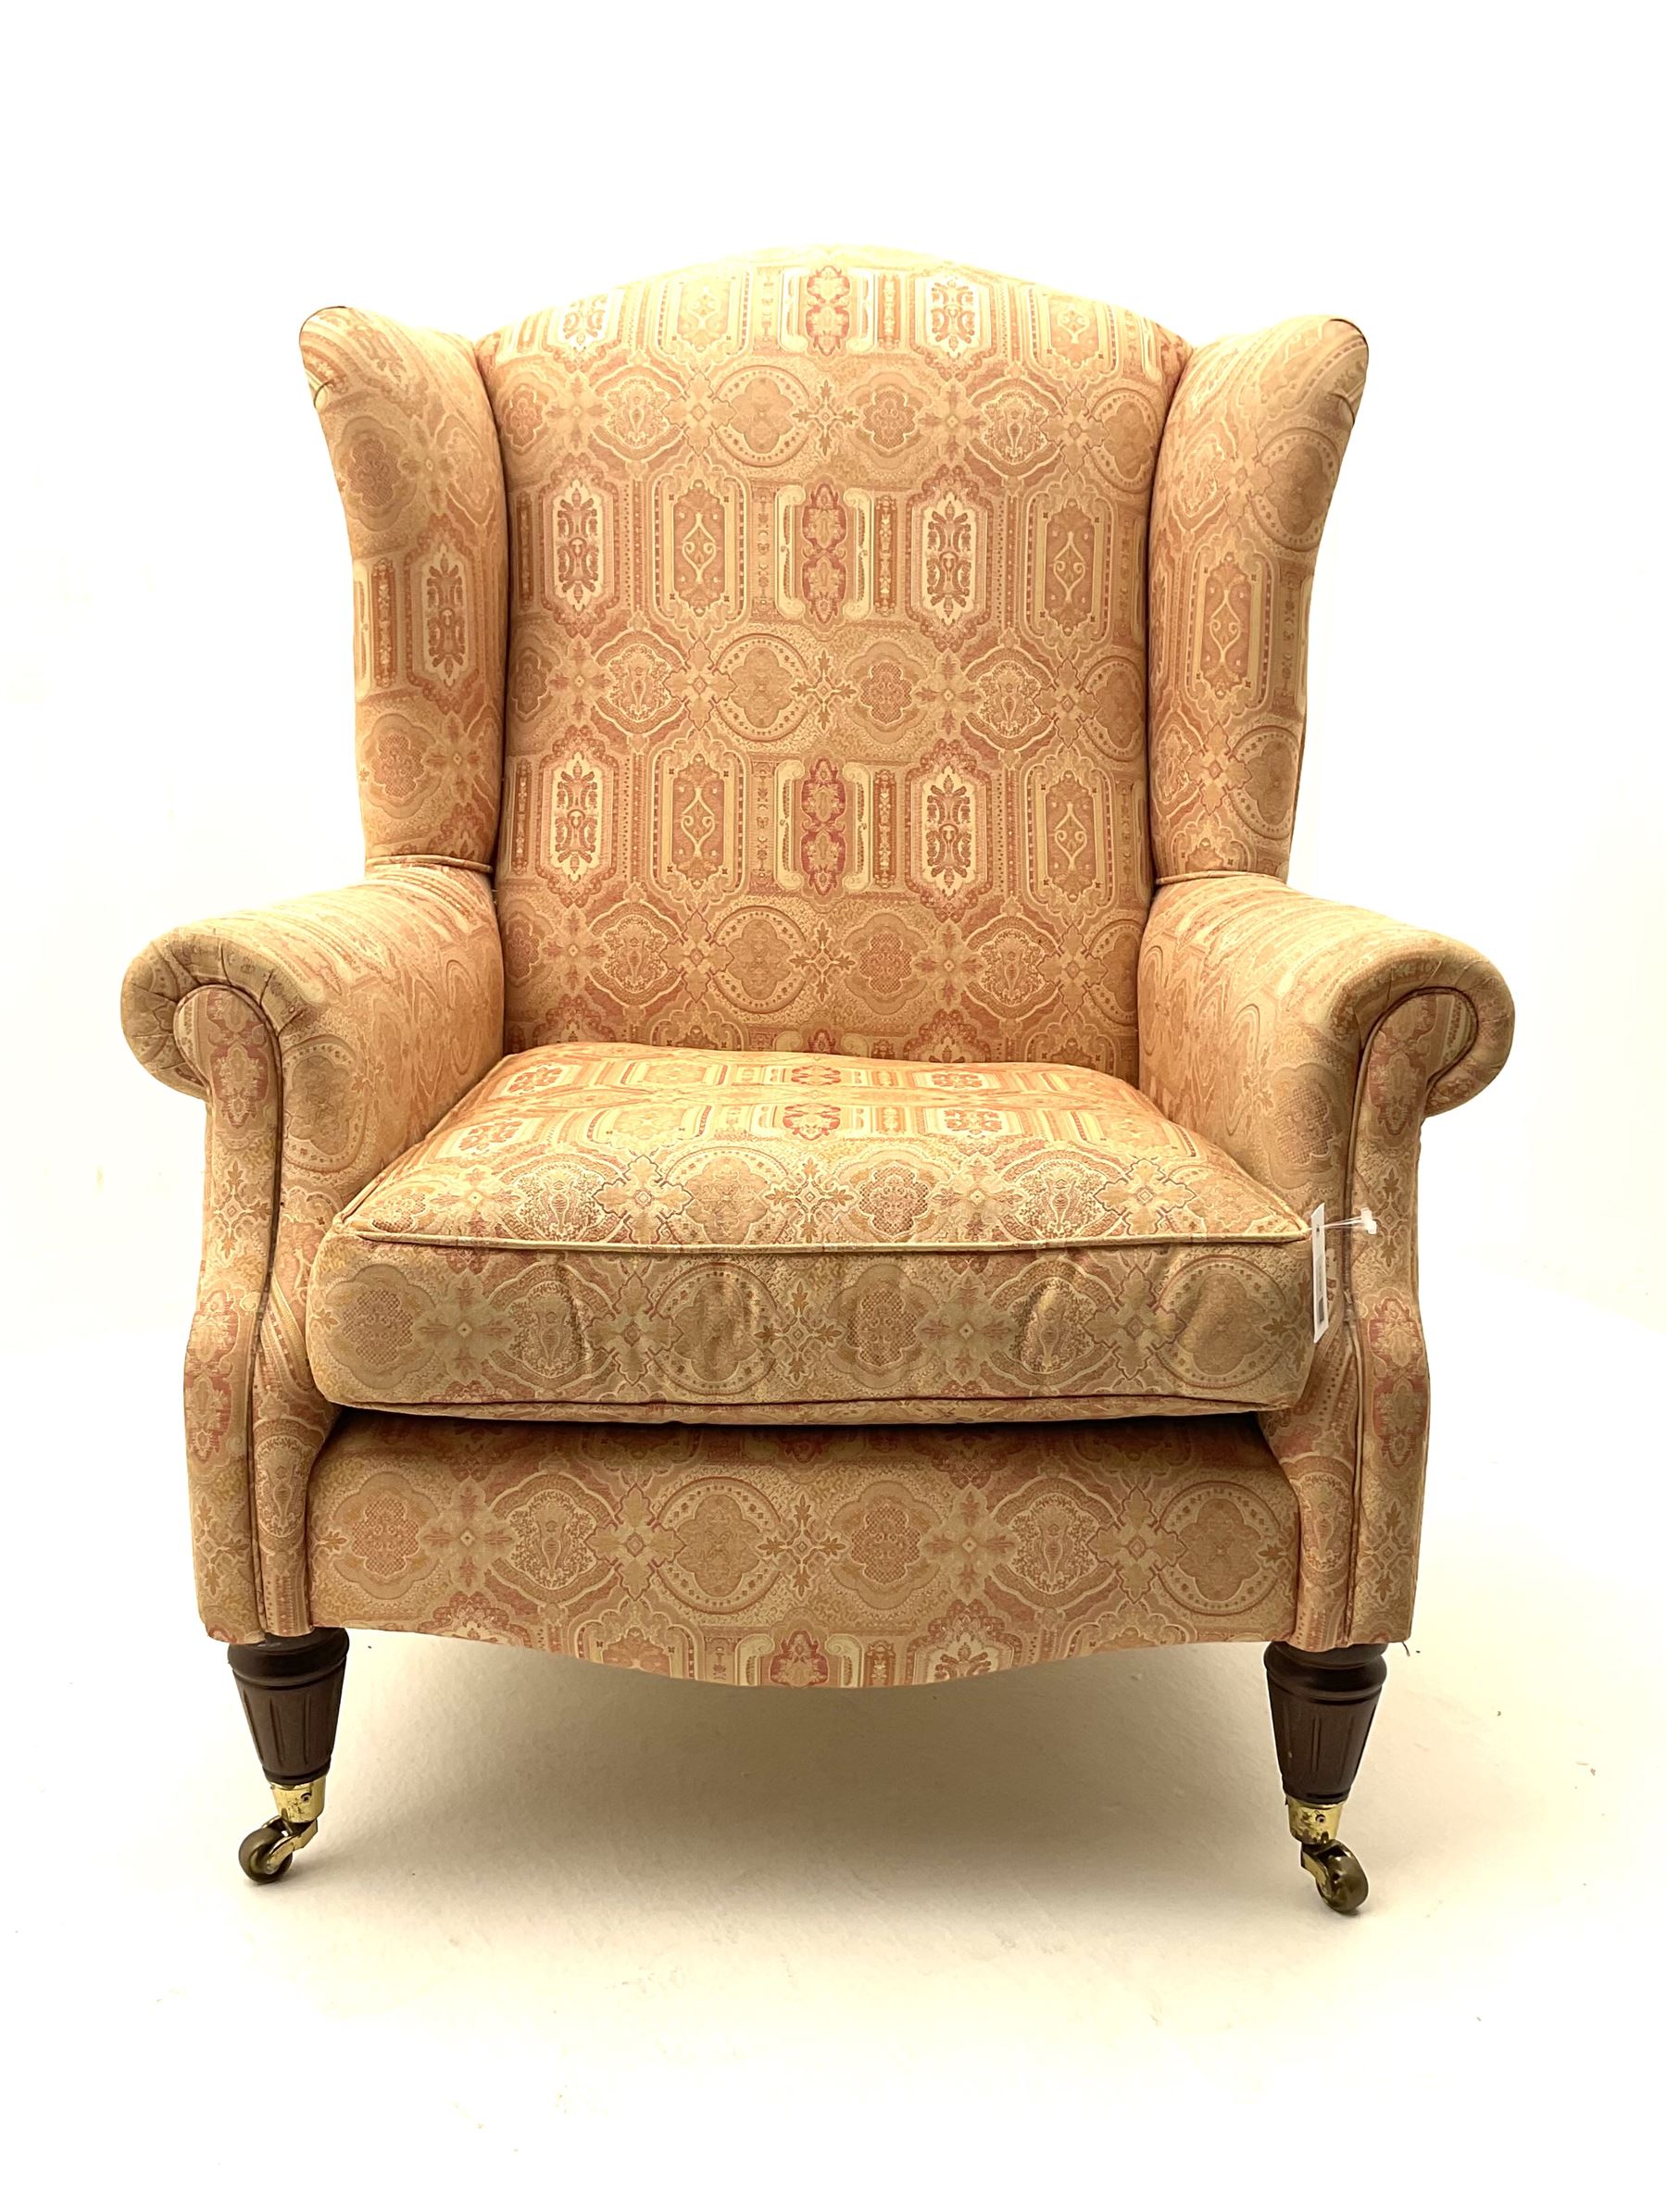 Late 20th century traditional shaped wingback armchair upholstered in pale pink patterned fabric